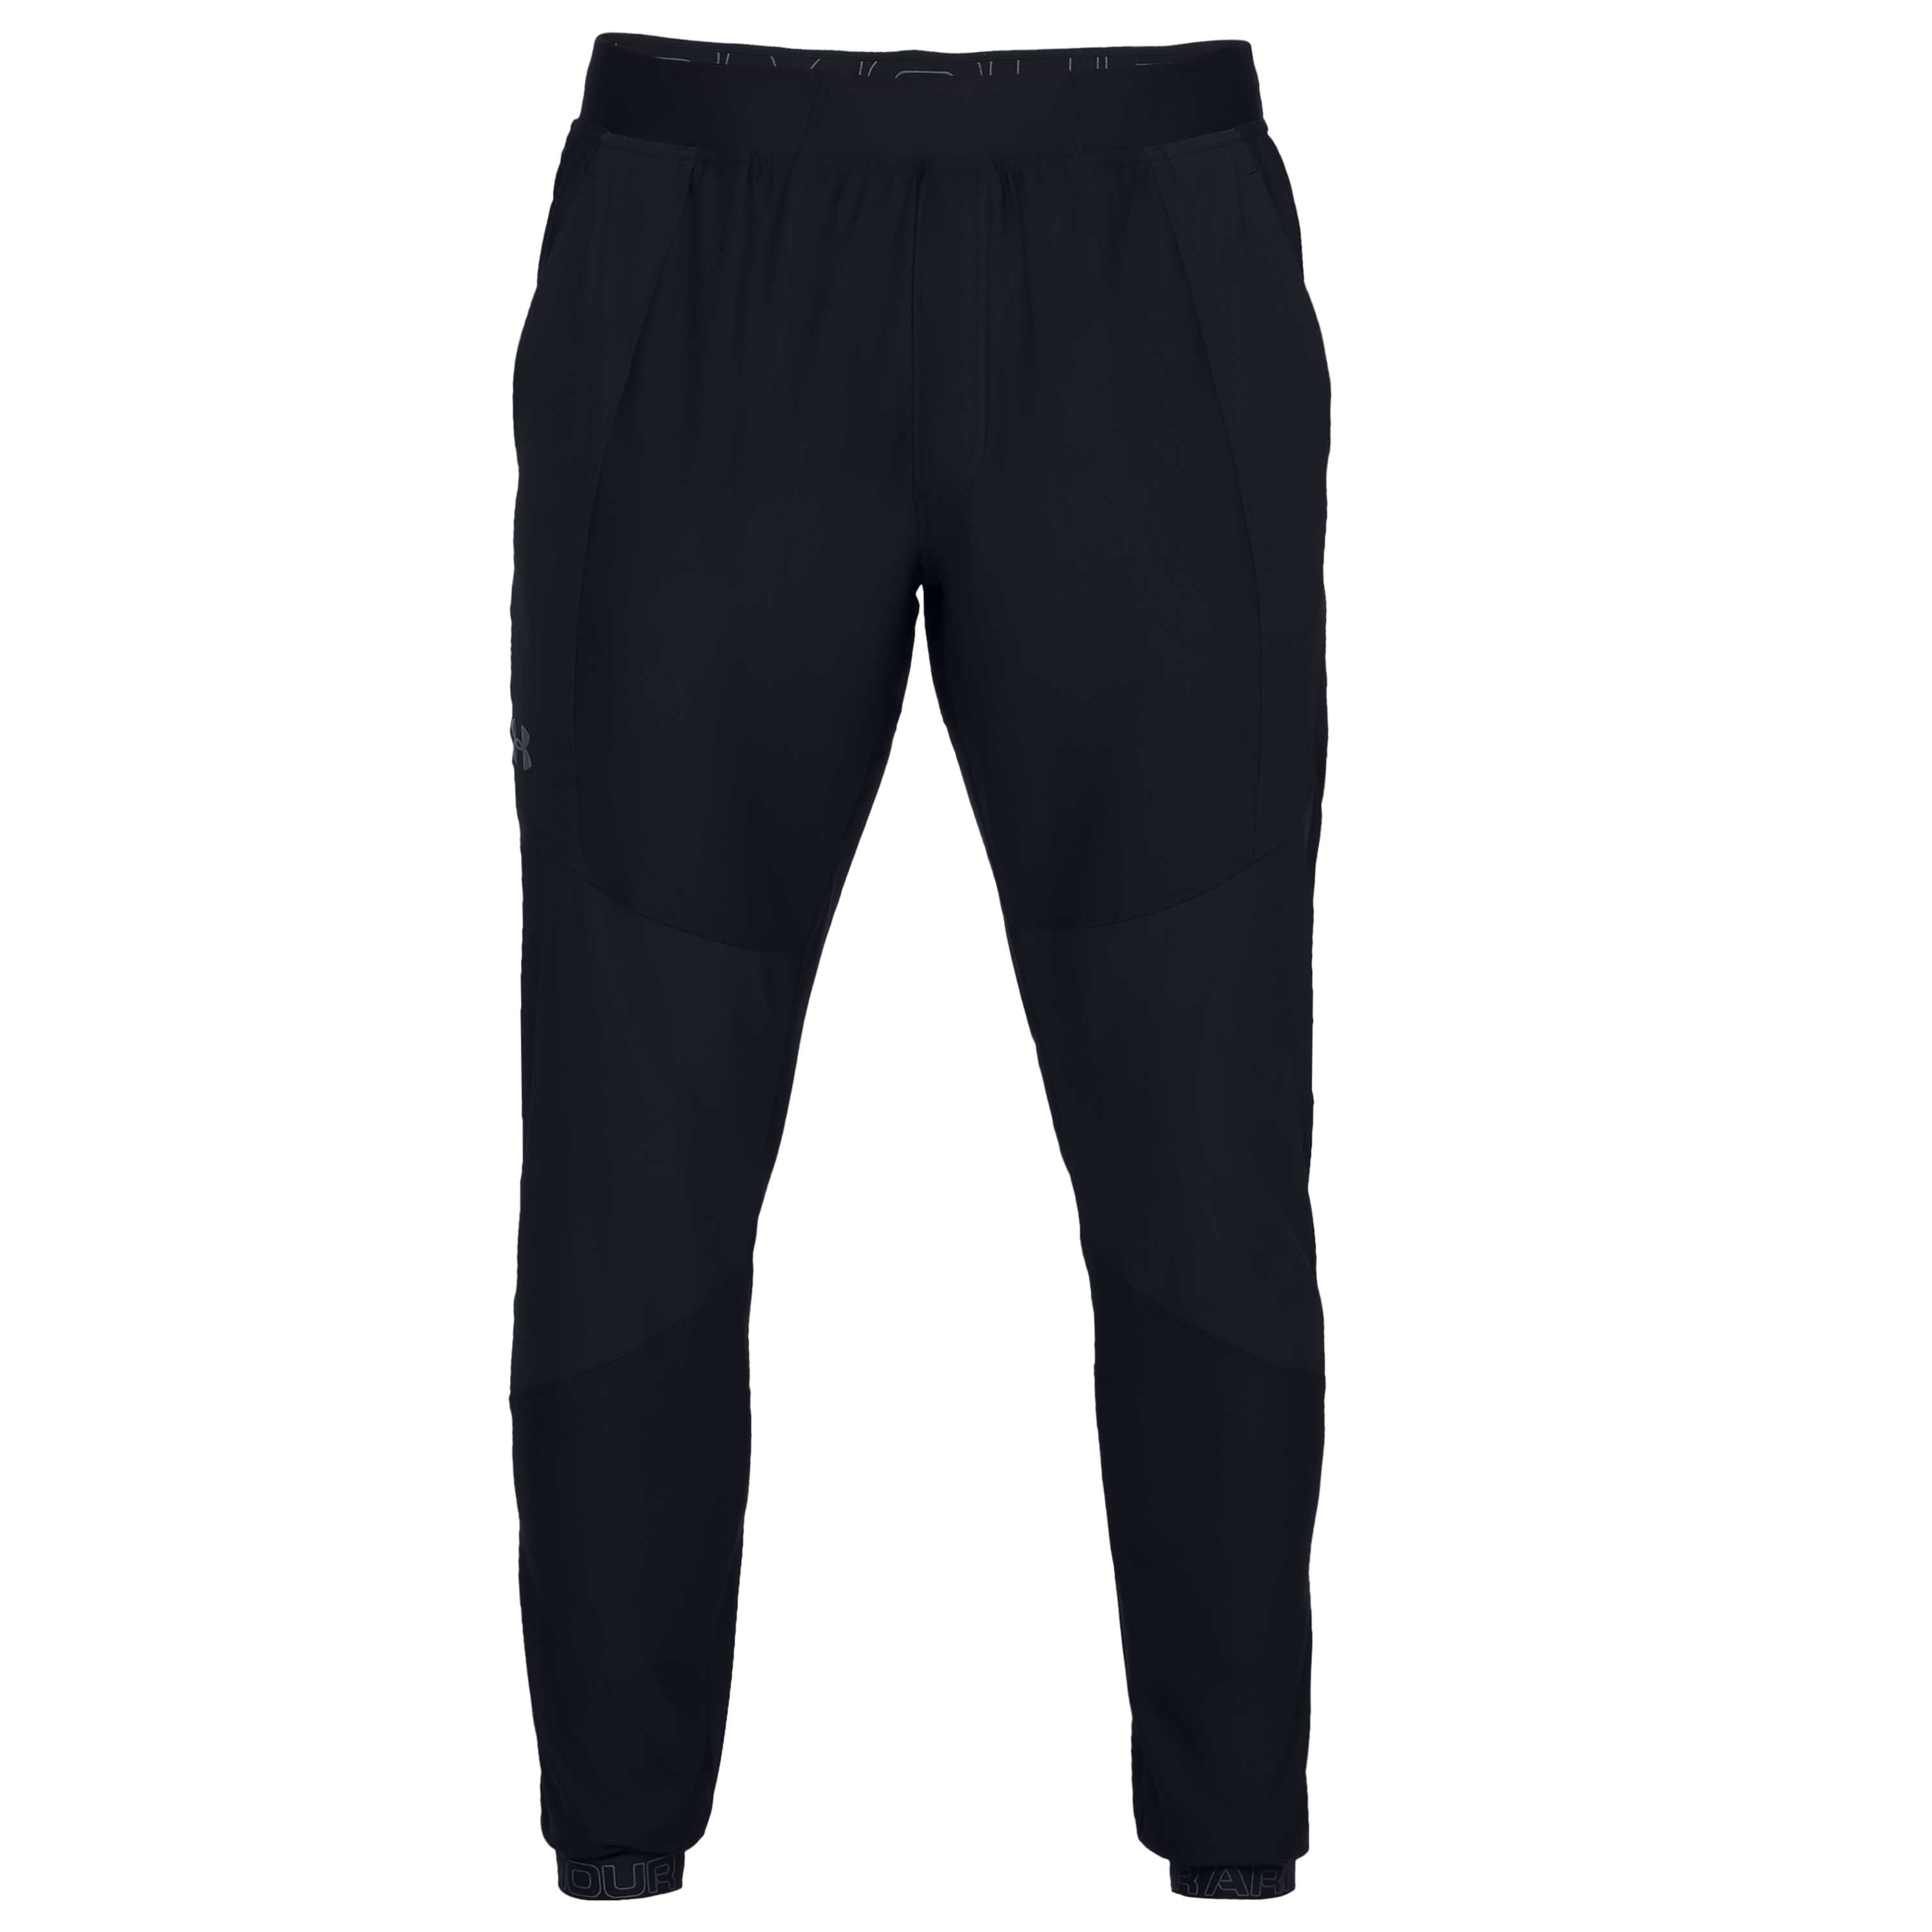 Purchase the Under Armour Pants Vanish Hybrid black by ASMC